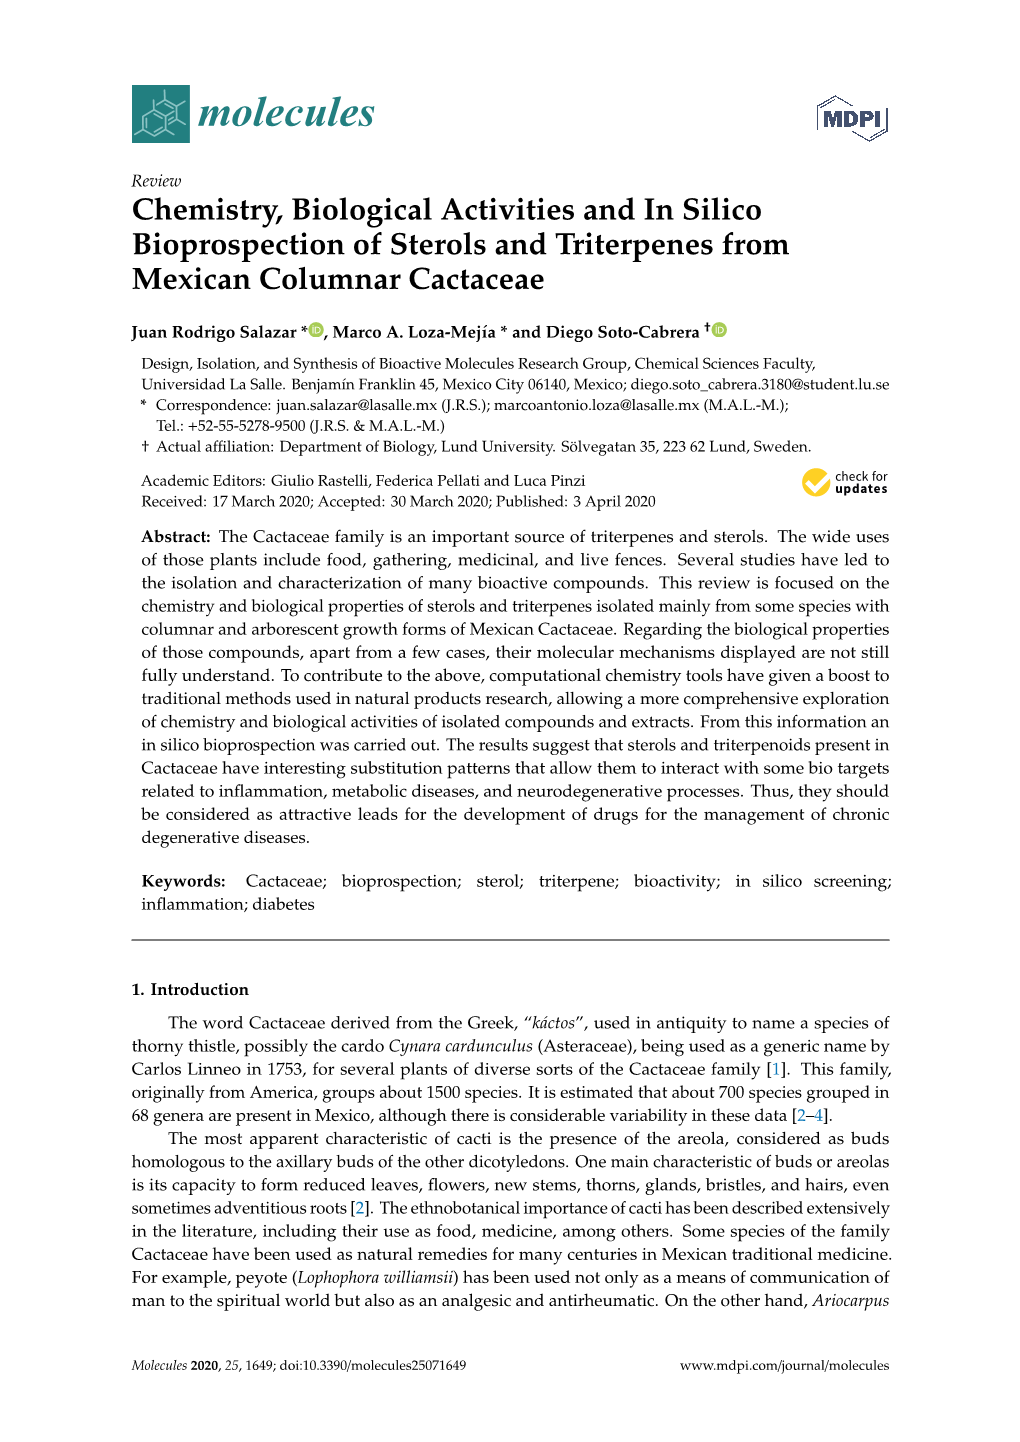 Chemistry, Biological Activities and in Silico Bioprospection of Sterols and Triterpenes from Mexican Columnar Cactaceae